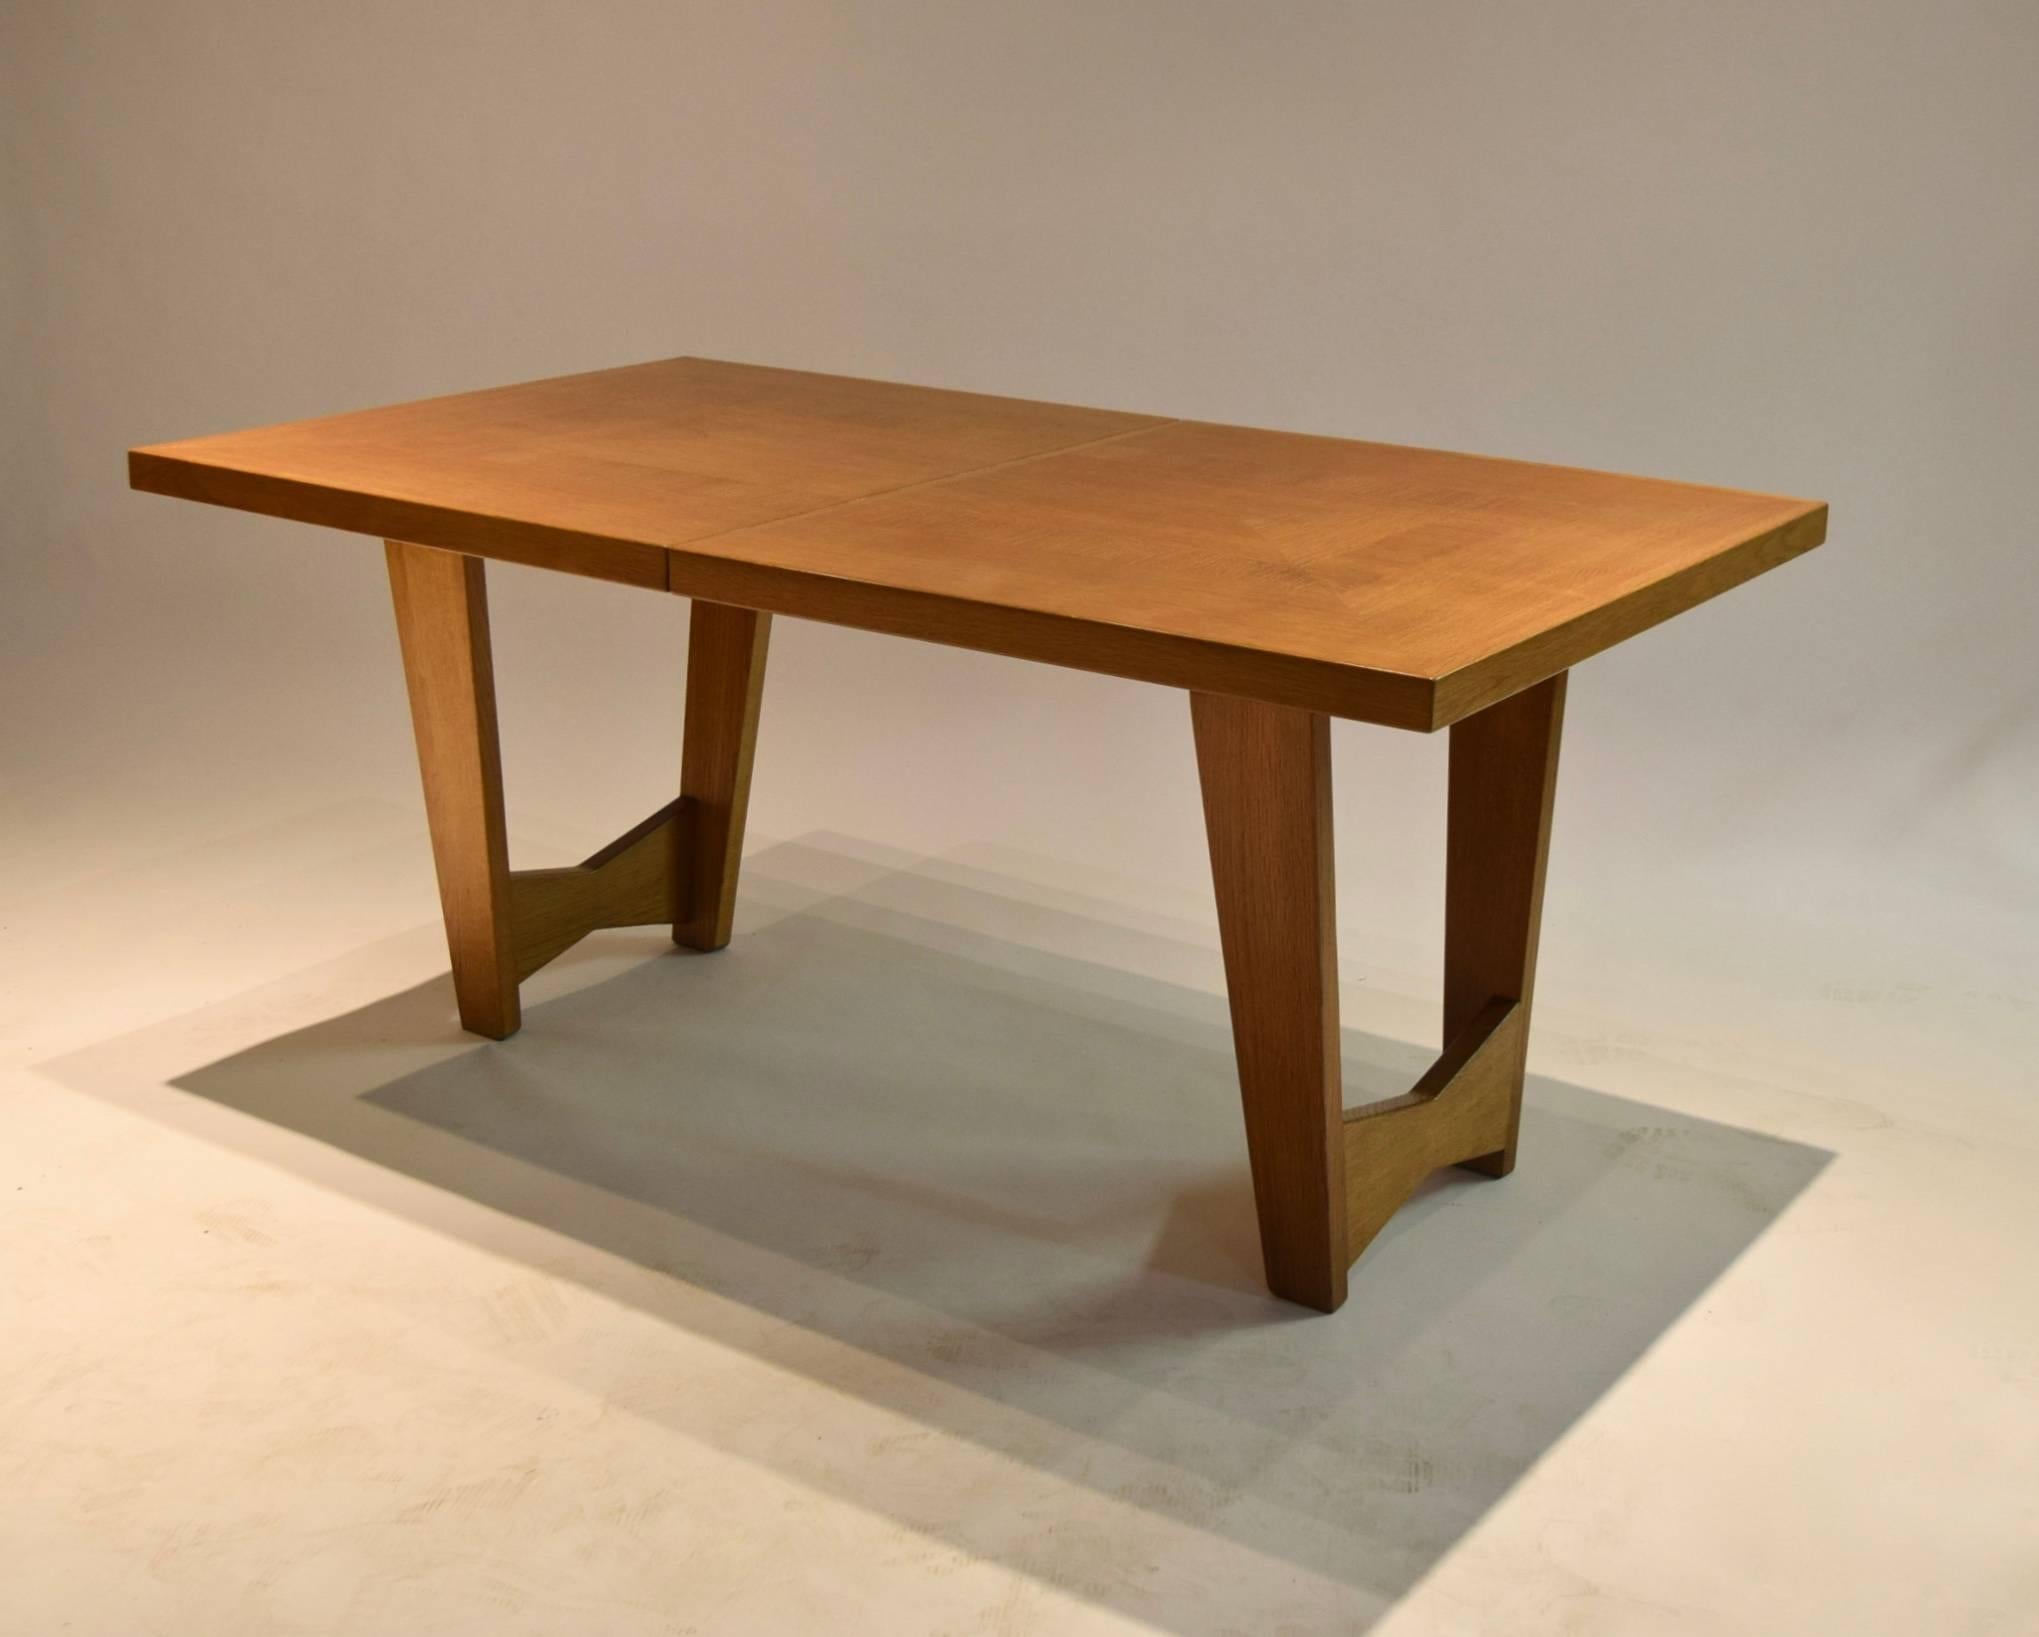 Extending dining table designed by Maurice Pré in oak wood, exhibiting very nice graining throughout. Comprises two 35 cm wide concealed leaves (approximately 13.75 inches wide) that are stored below the top's center opening, and two tapering leg